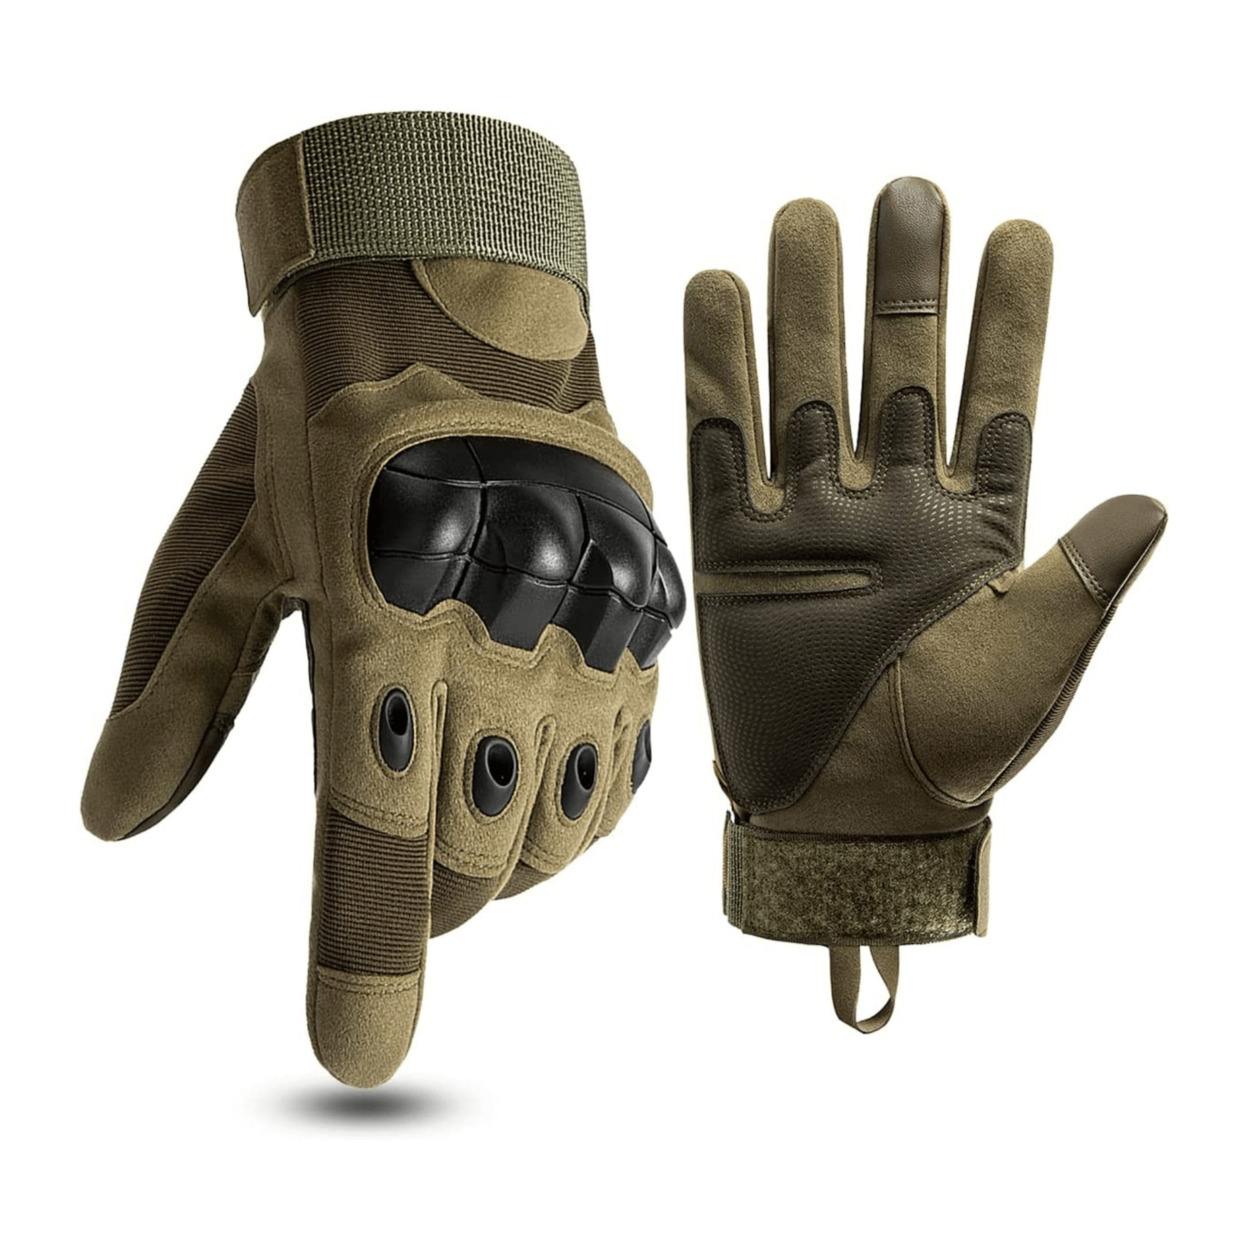 Tactical Military Airsoft Gloves For Outdoor Sports, Paintball, And Motorcycling With Touchscreen Fingertip Capability - Green, Medium